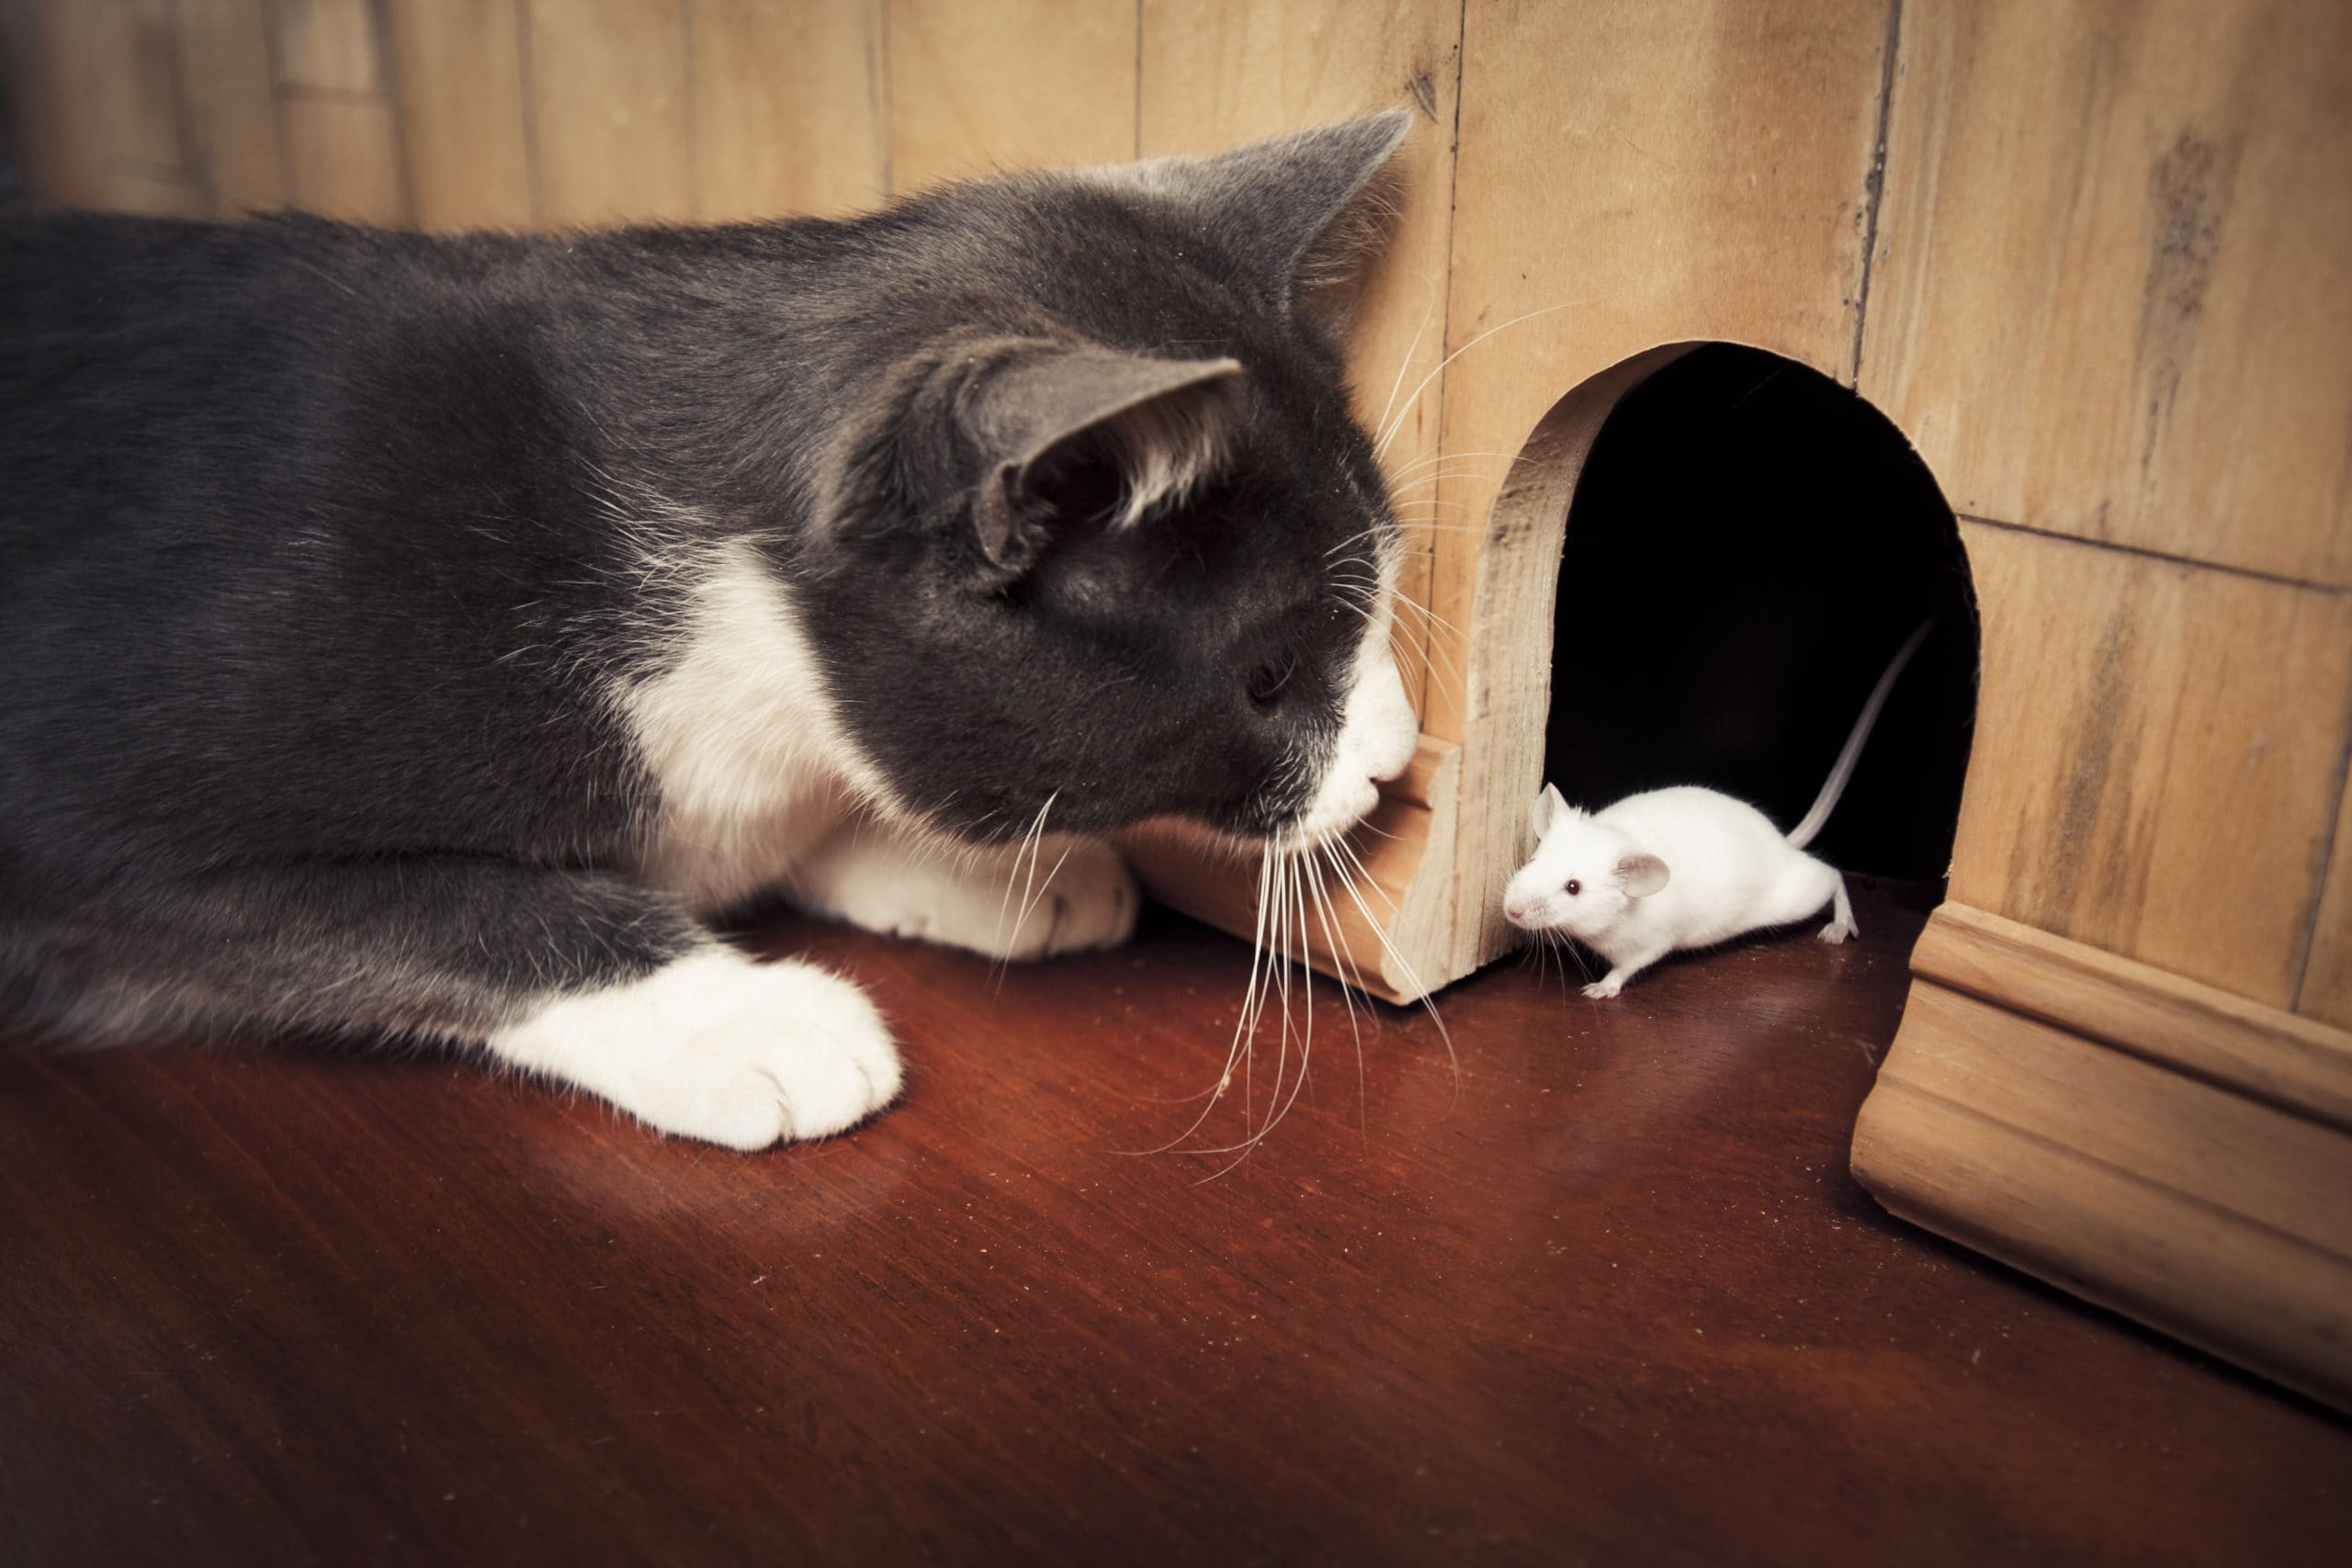 Brexit Cat-And-Mouse Game In Bid To Gain Upper Hand.